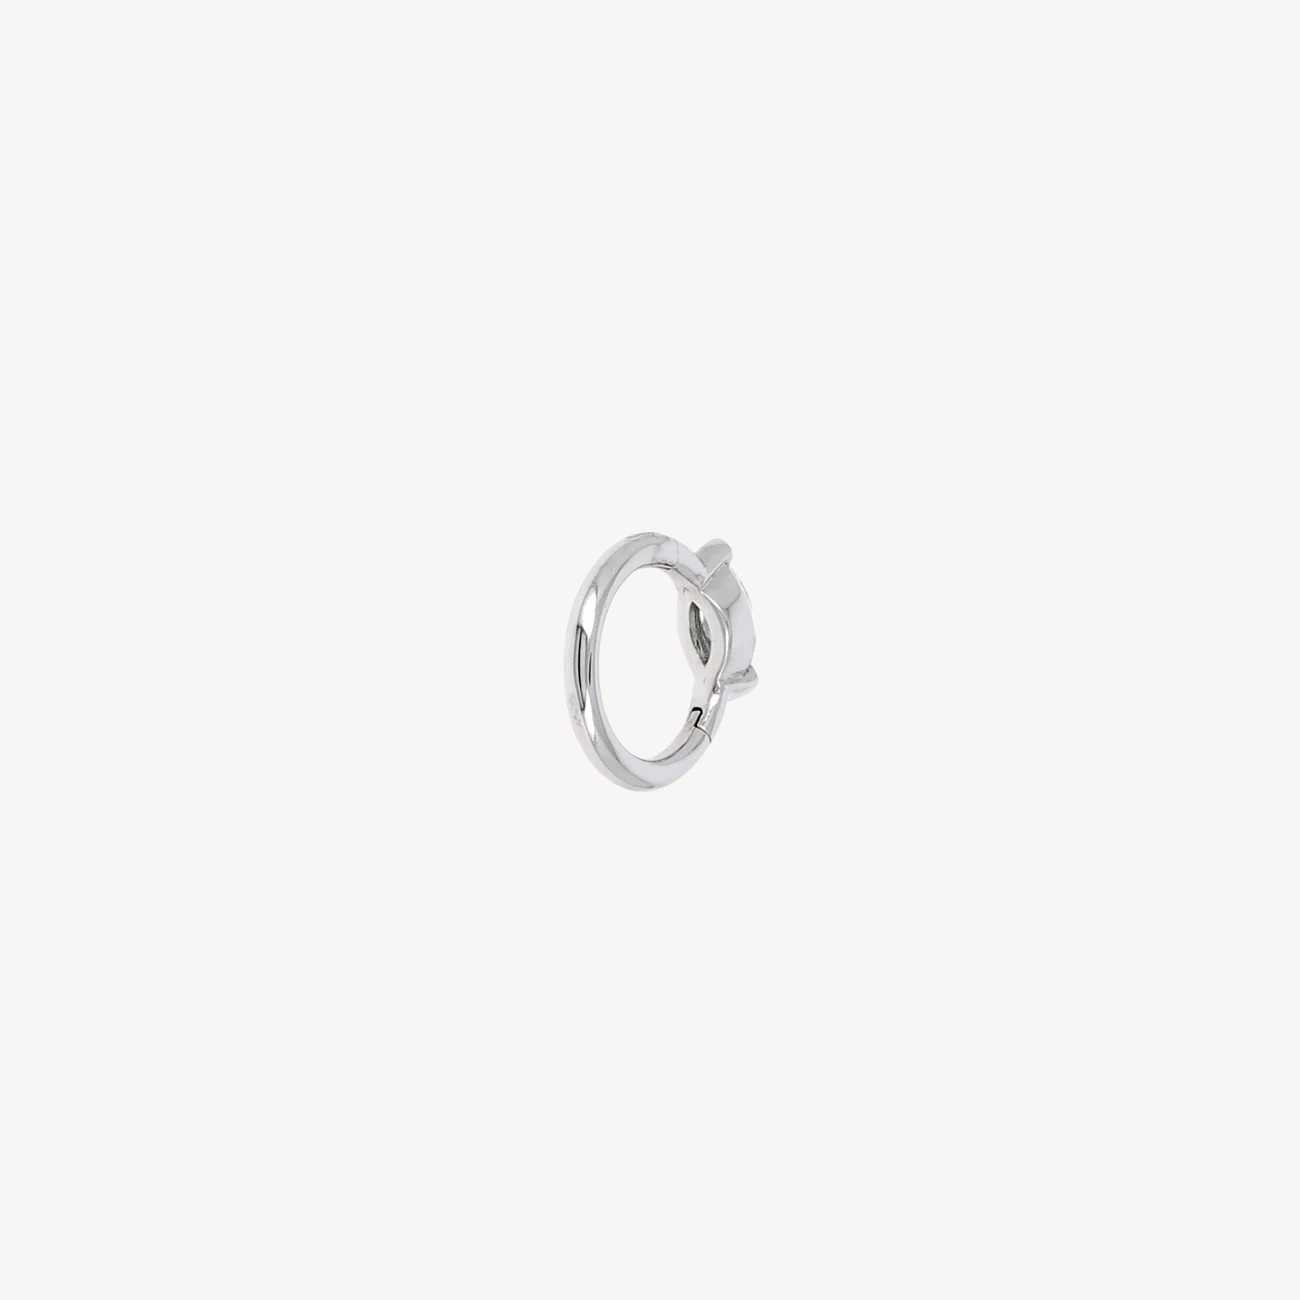 6.5mm 4.5x2mm marquise white gold hoop